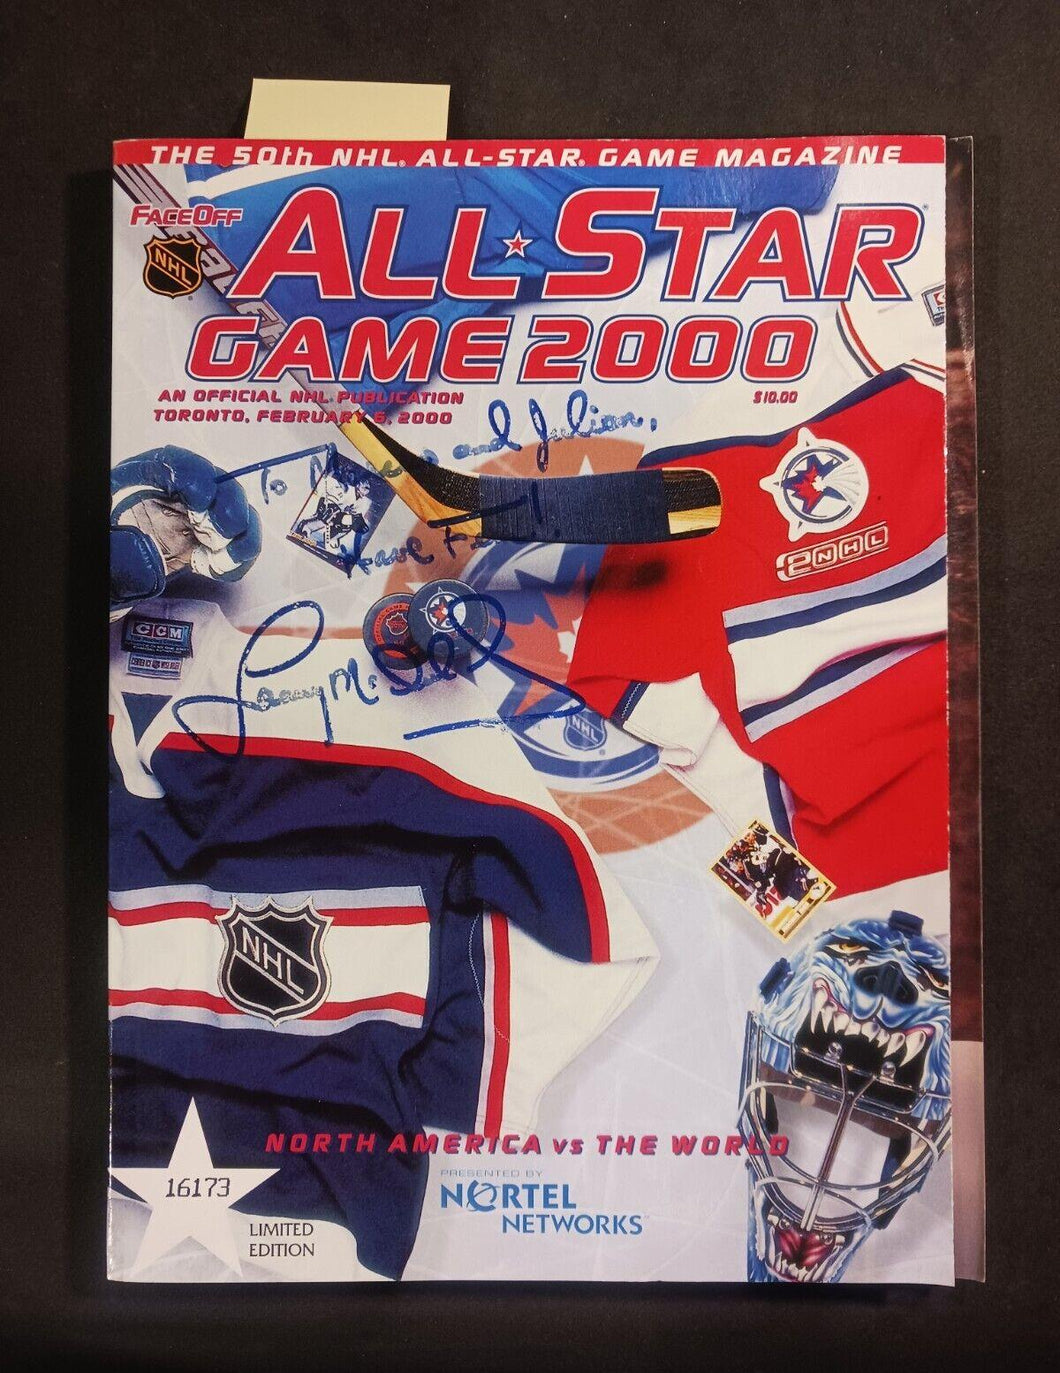 2000 NHL Hockey All Star Game Program Signed by Lanny McDonald on Cover/Page 10